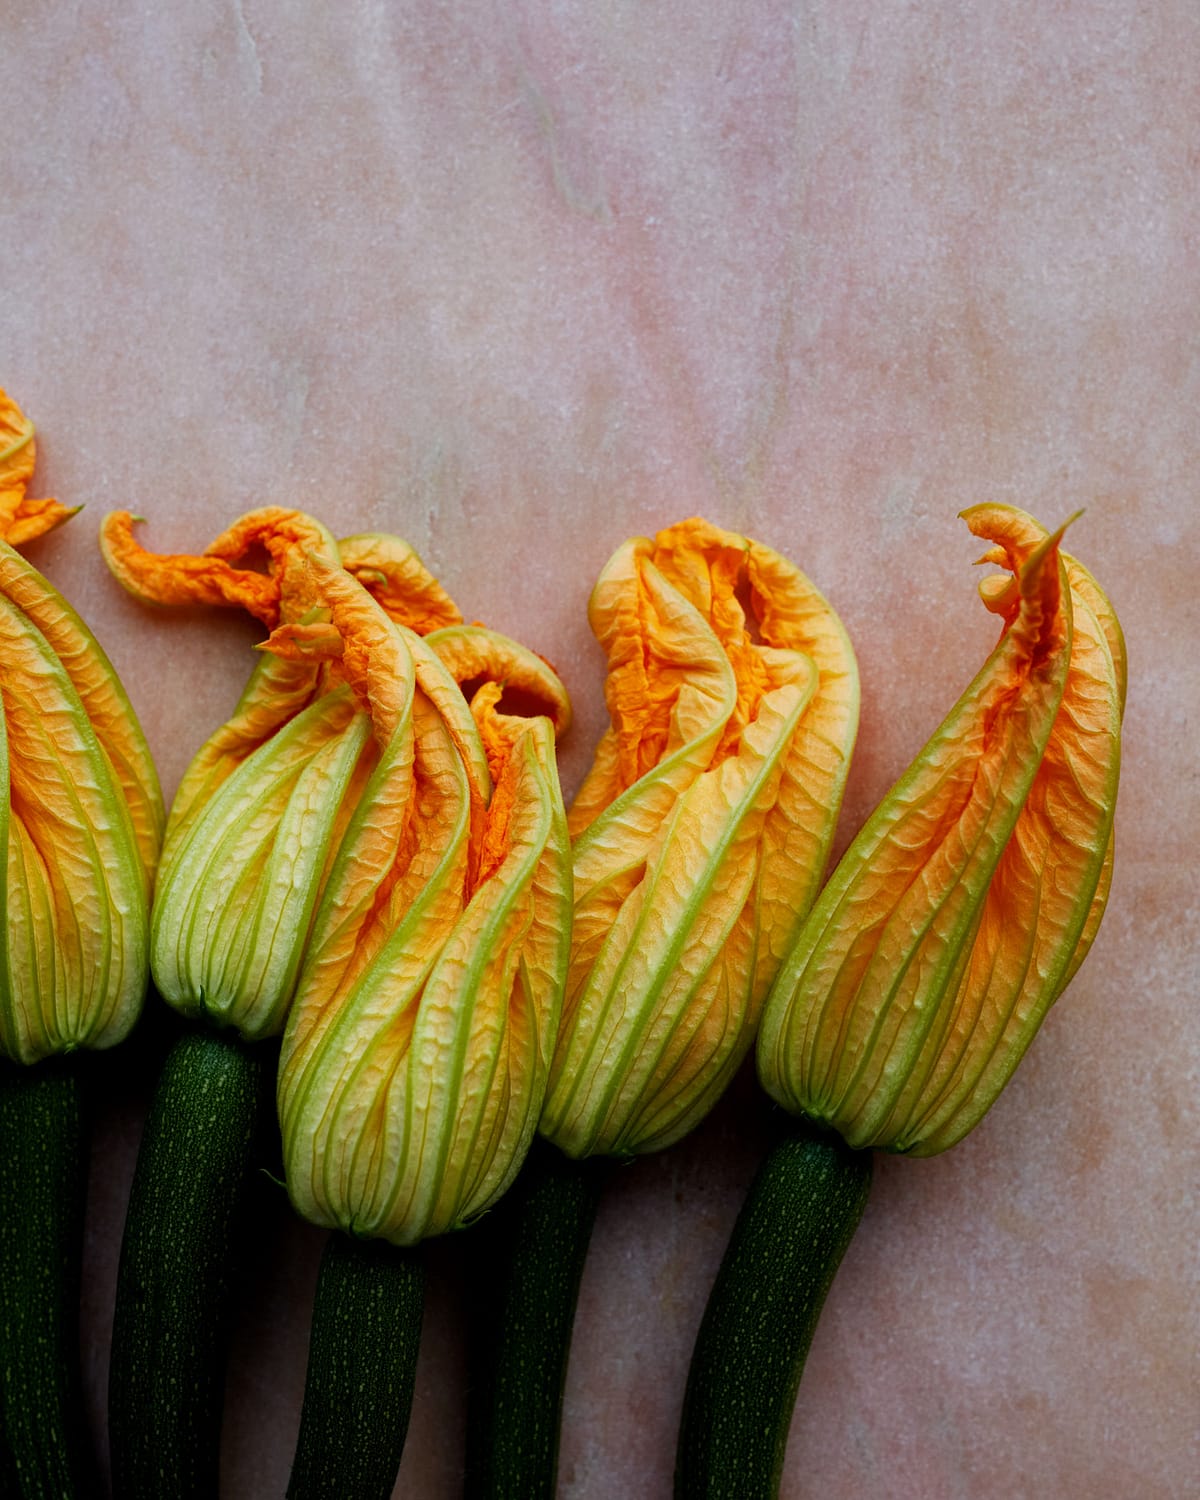 Courgette_Flower_Incidental_07